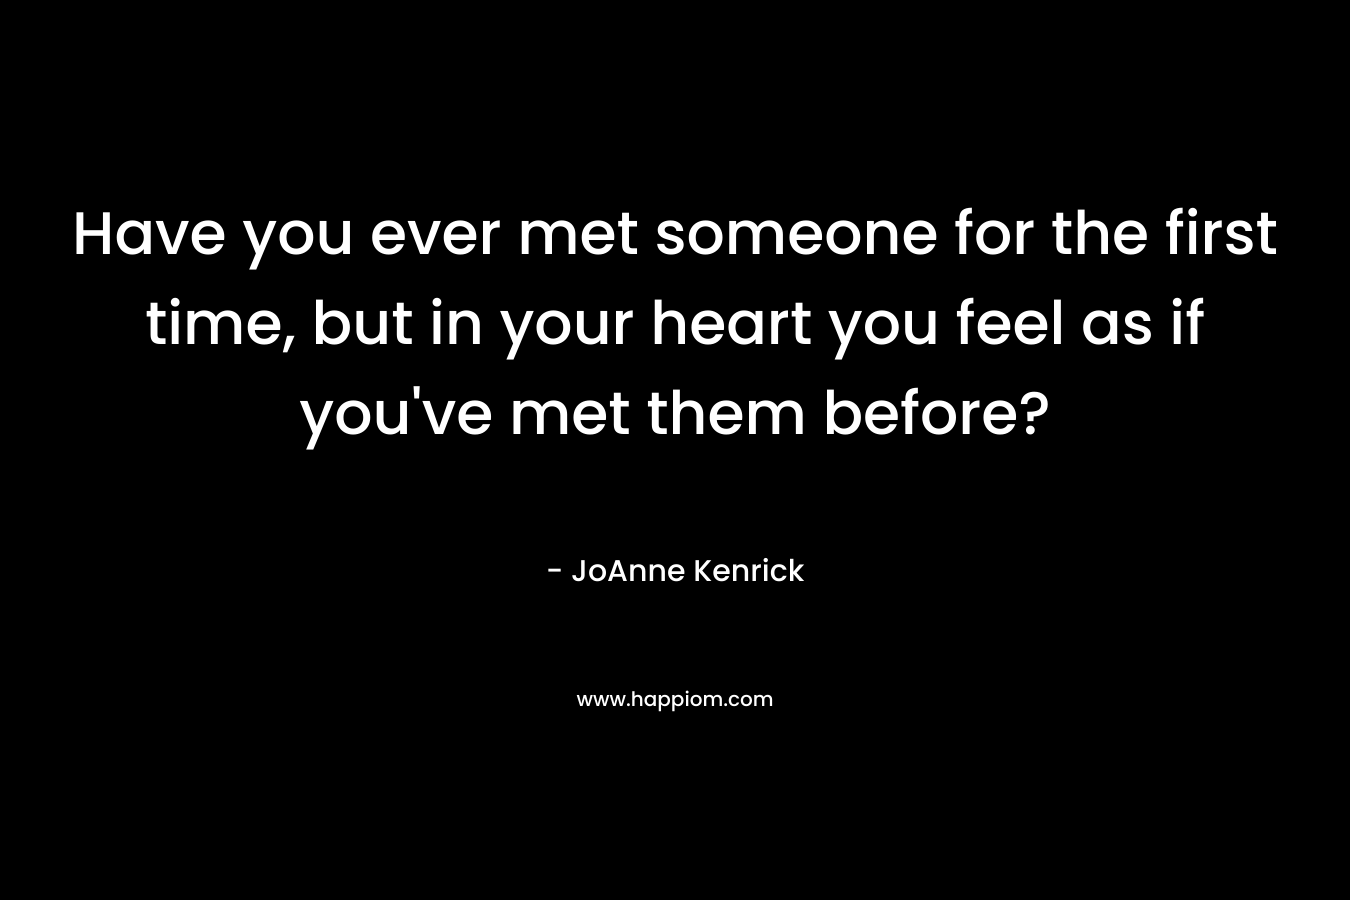 Have you ever met someone for the first time, but in your heart you feel as if you've met them before?